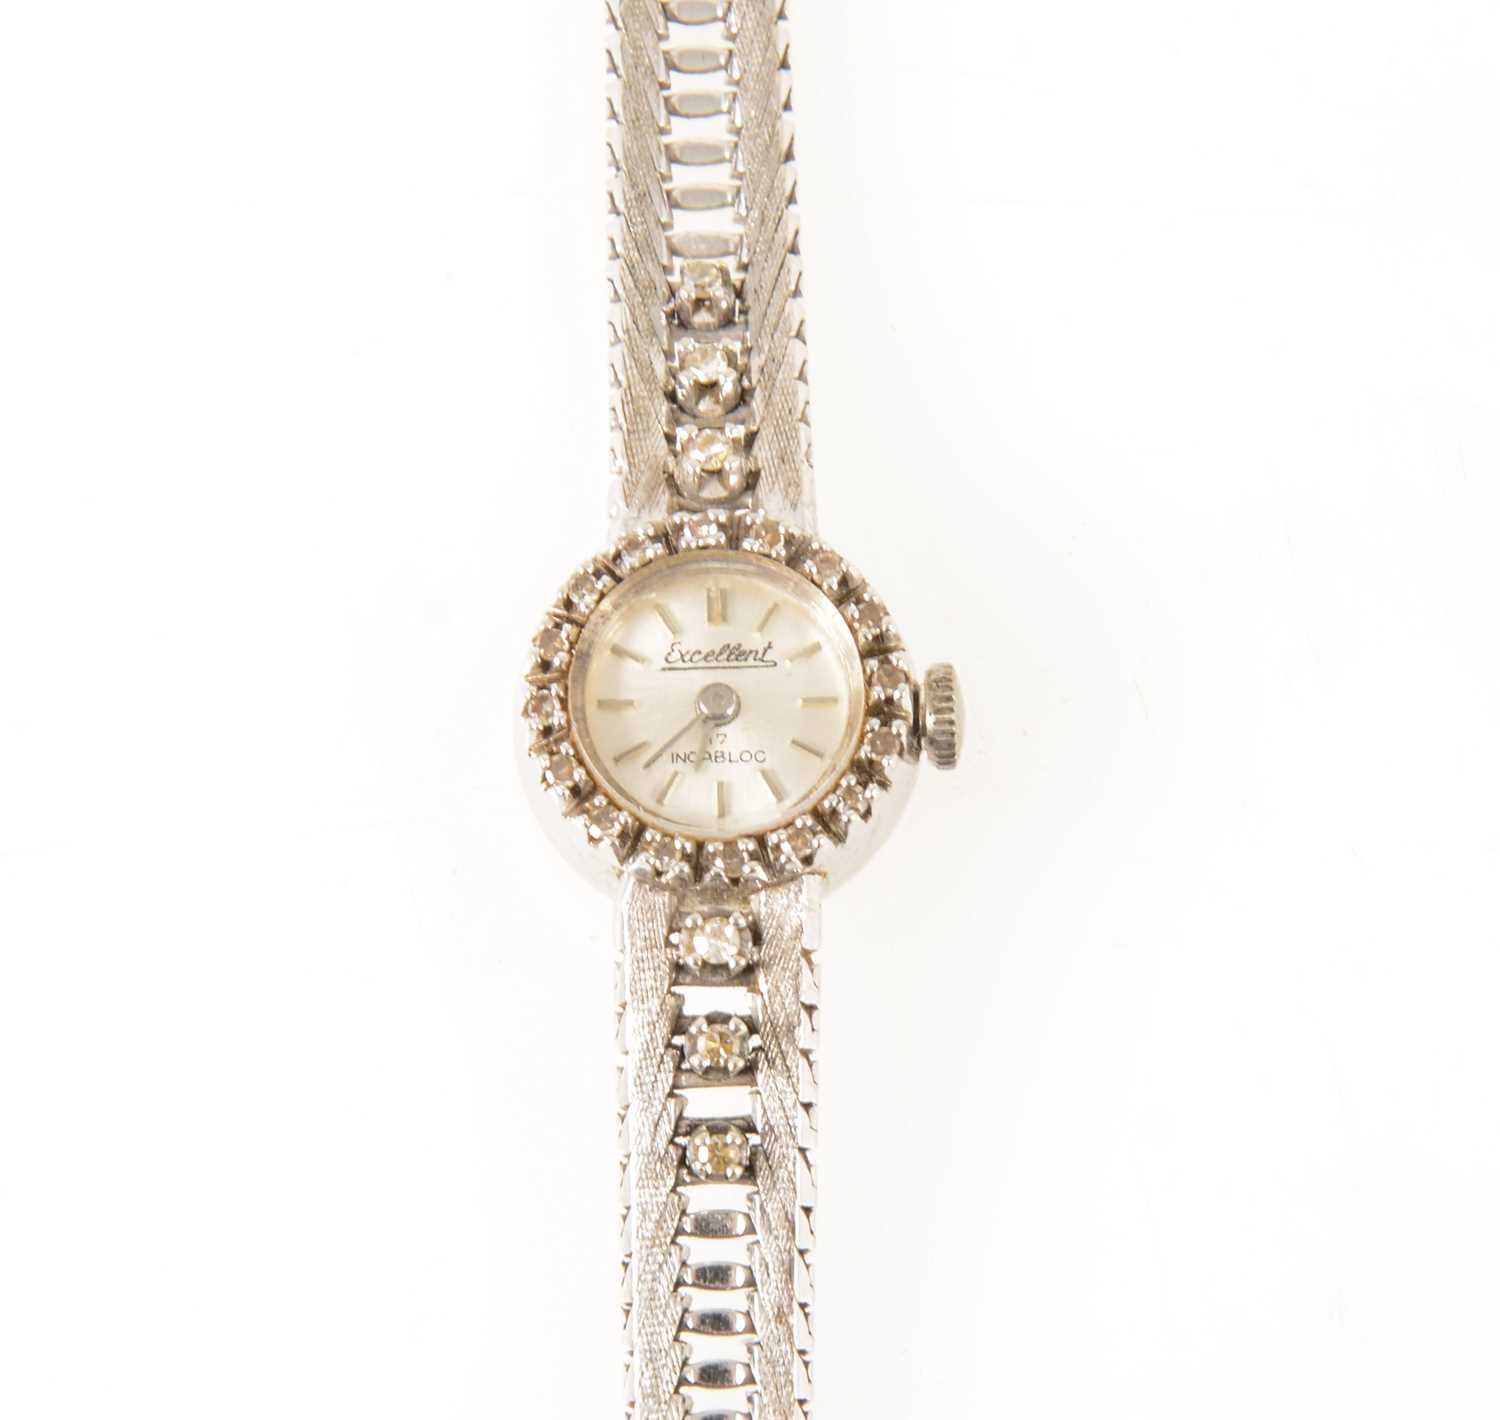 Lot 146 - Excellent - a lady's cocktail watch.